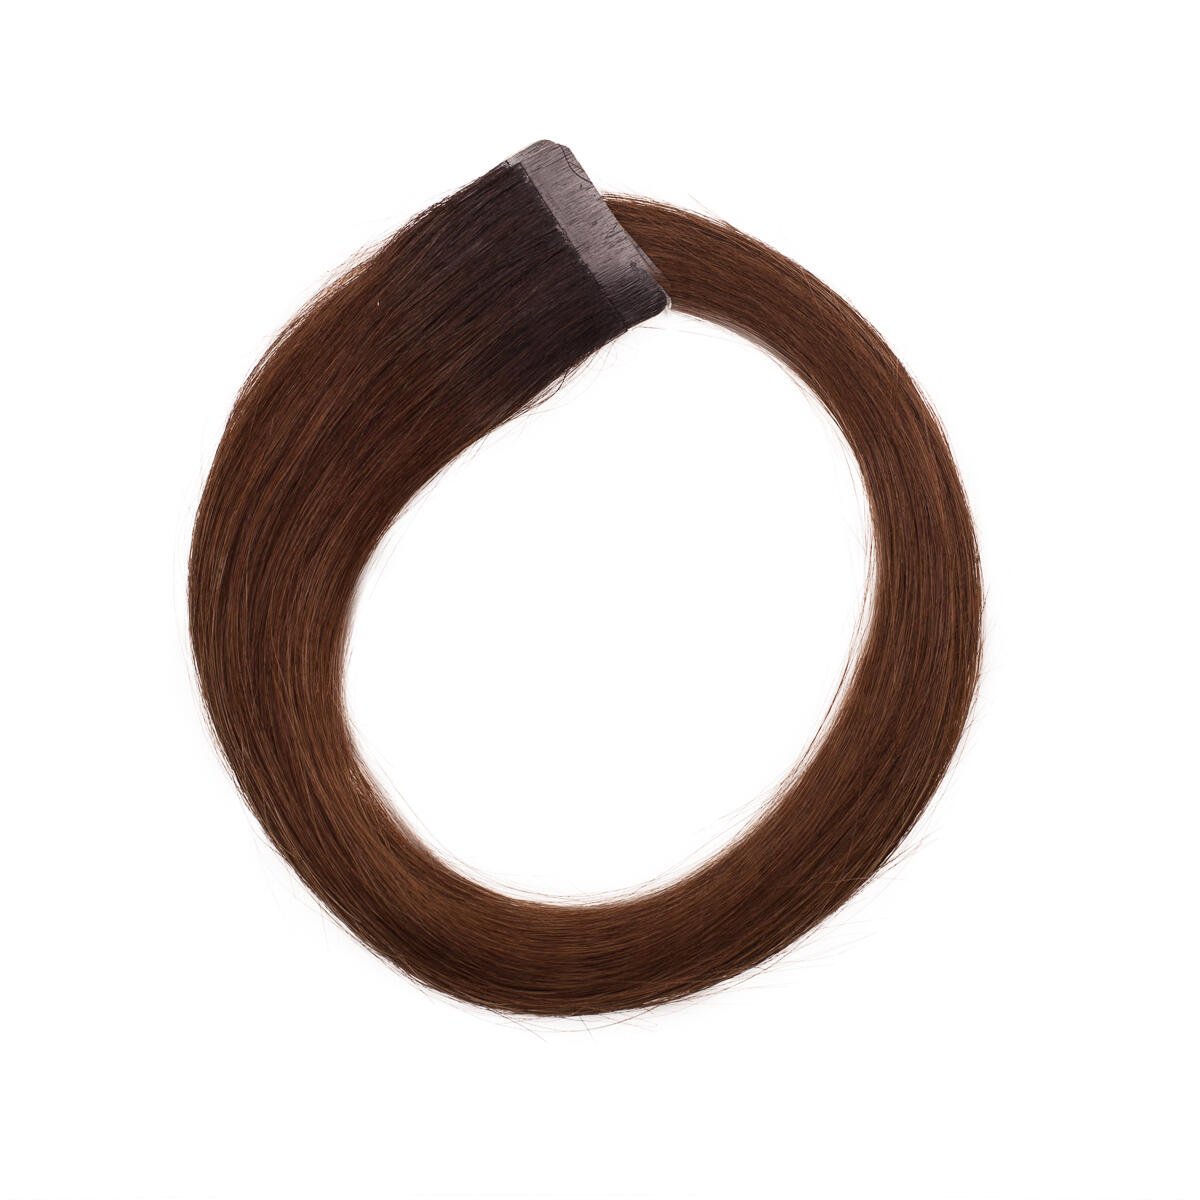 Basic Tape Extensions Classic 4 R2.3/5.0 Chocolate Brown Root 50 cm